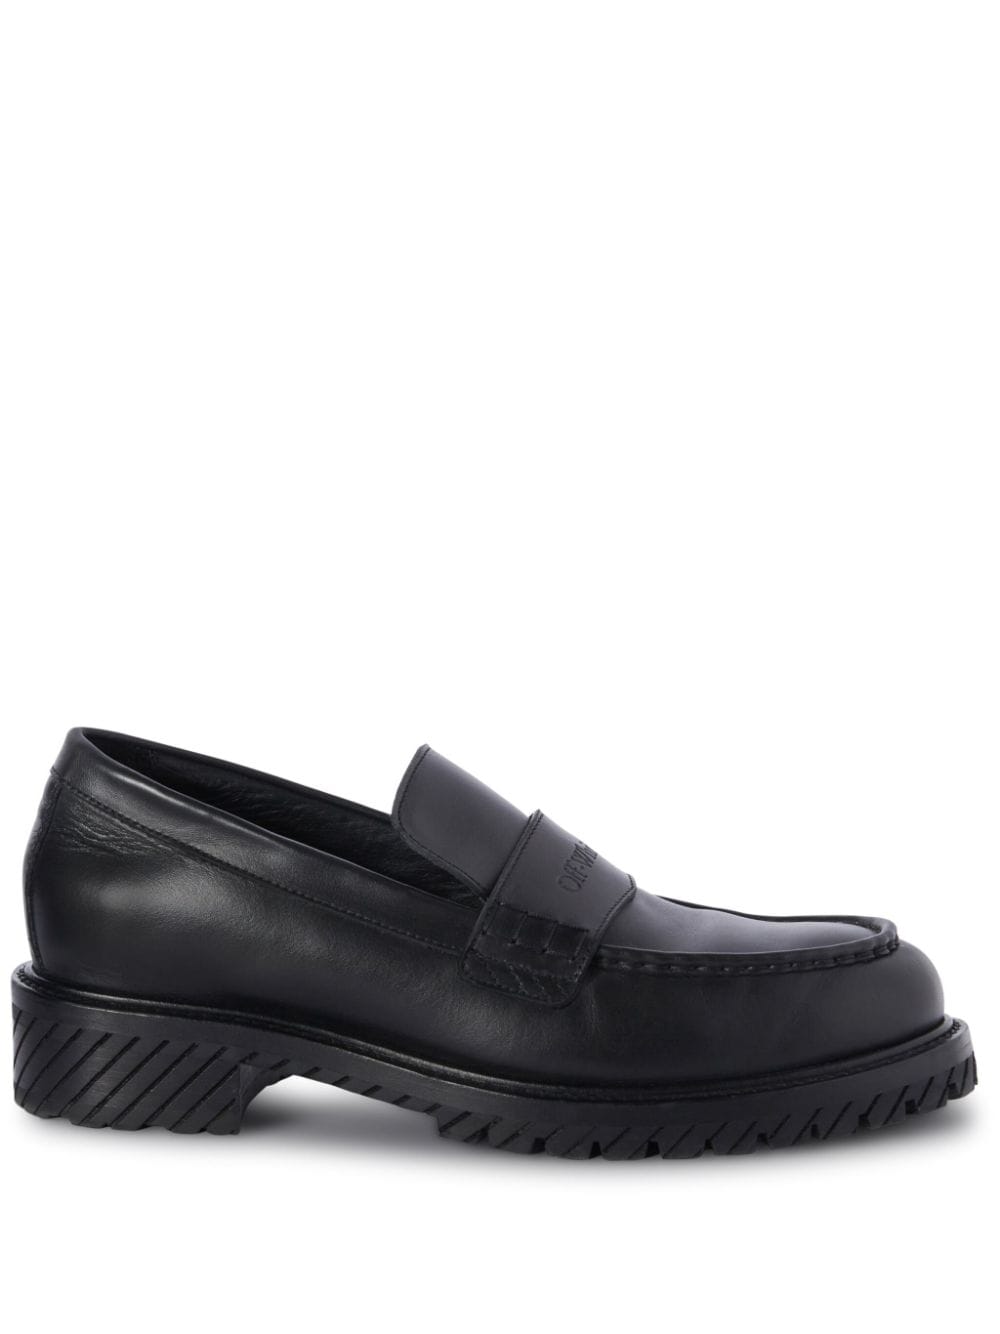 OFF-WHITE Black Military Moccasins for Men - SS24 Collection